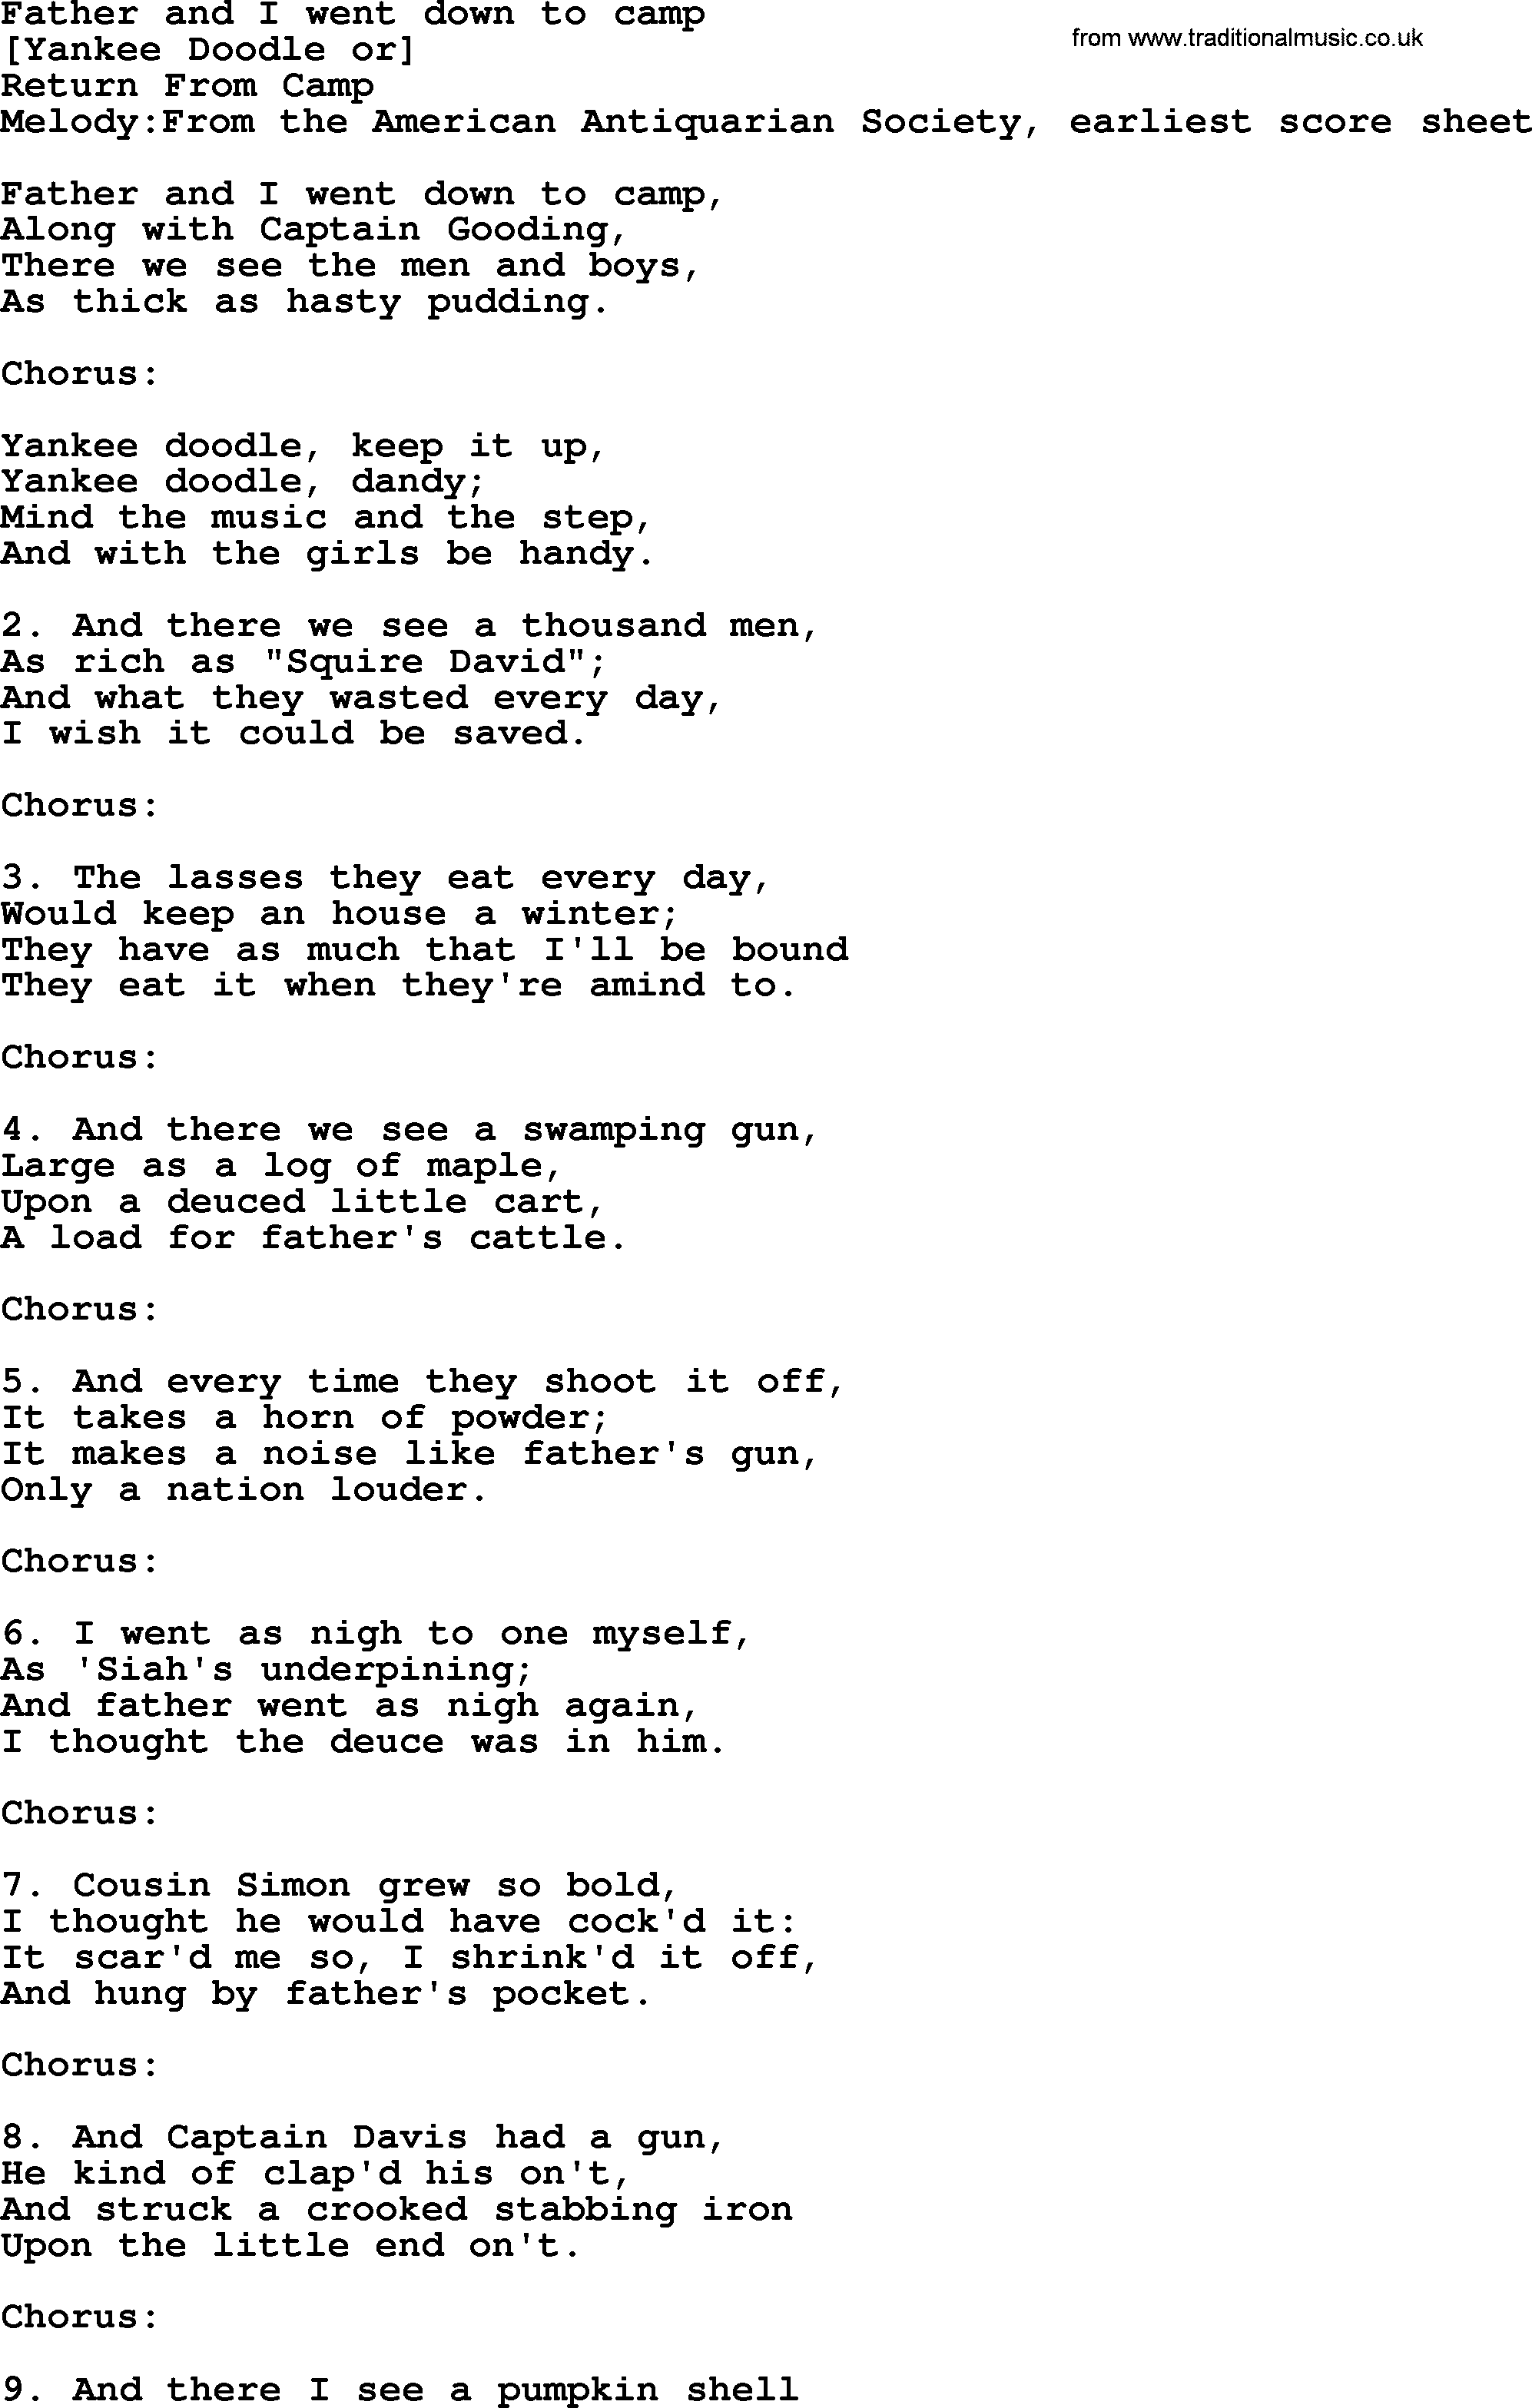 Old American Song: Father And I Went Down To Camp, lyrics